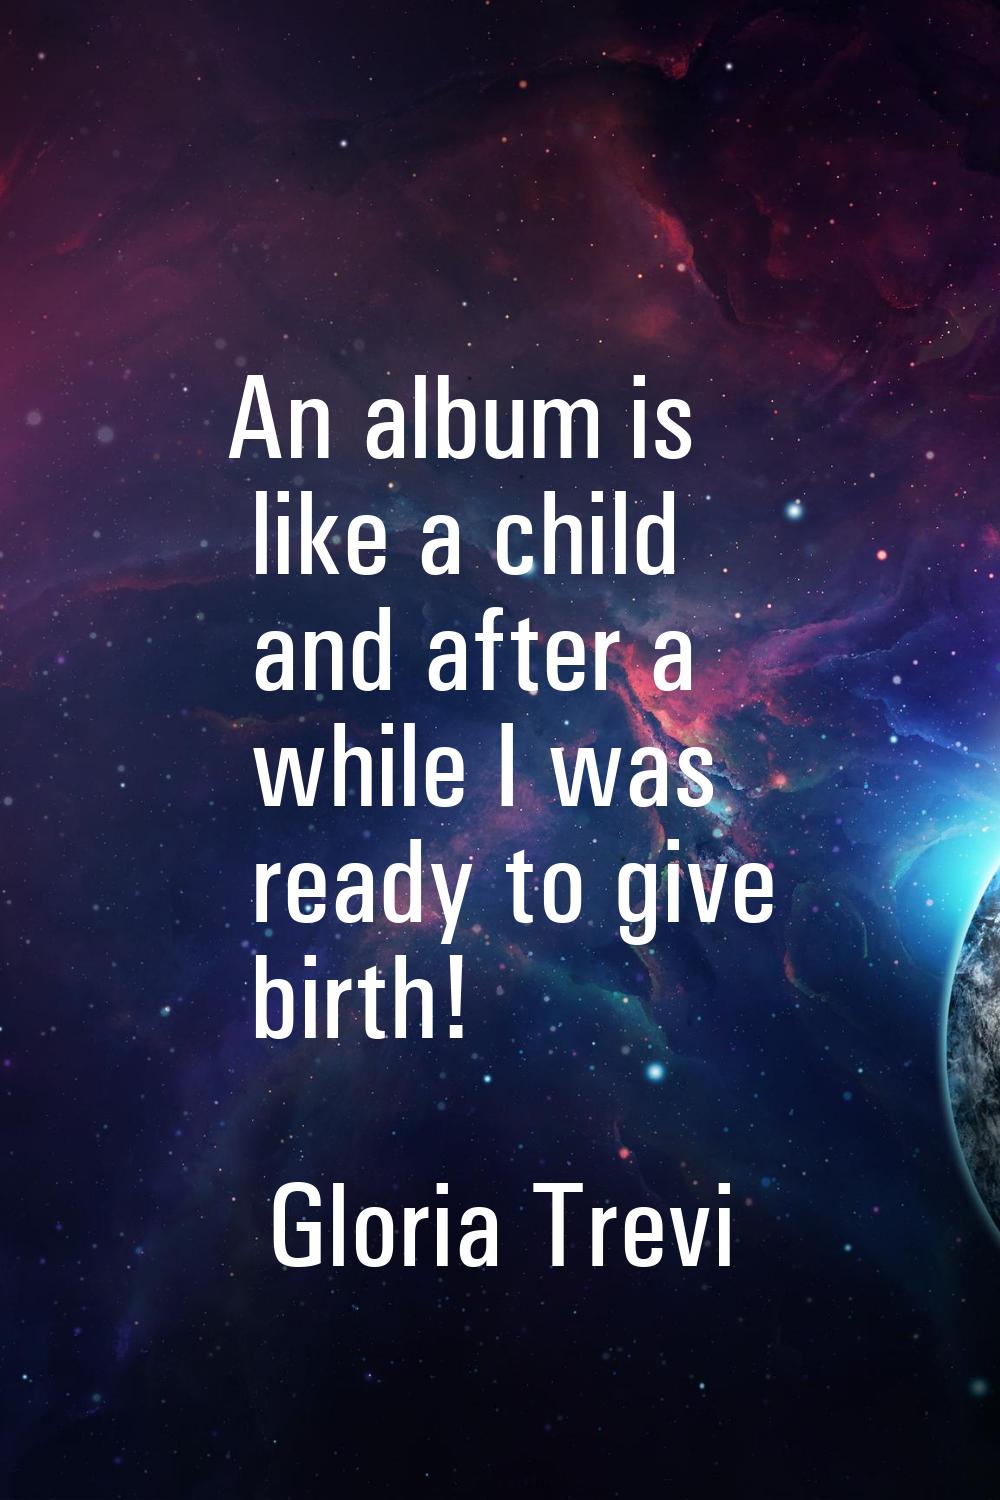 An album is like a child and after a while I was ready to give birth!